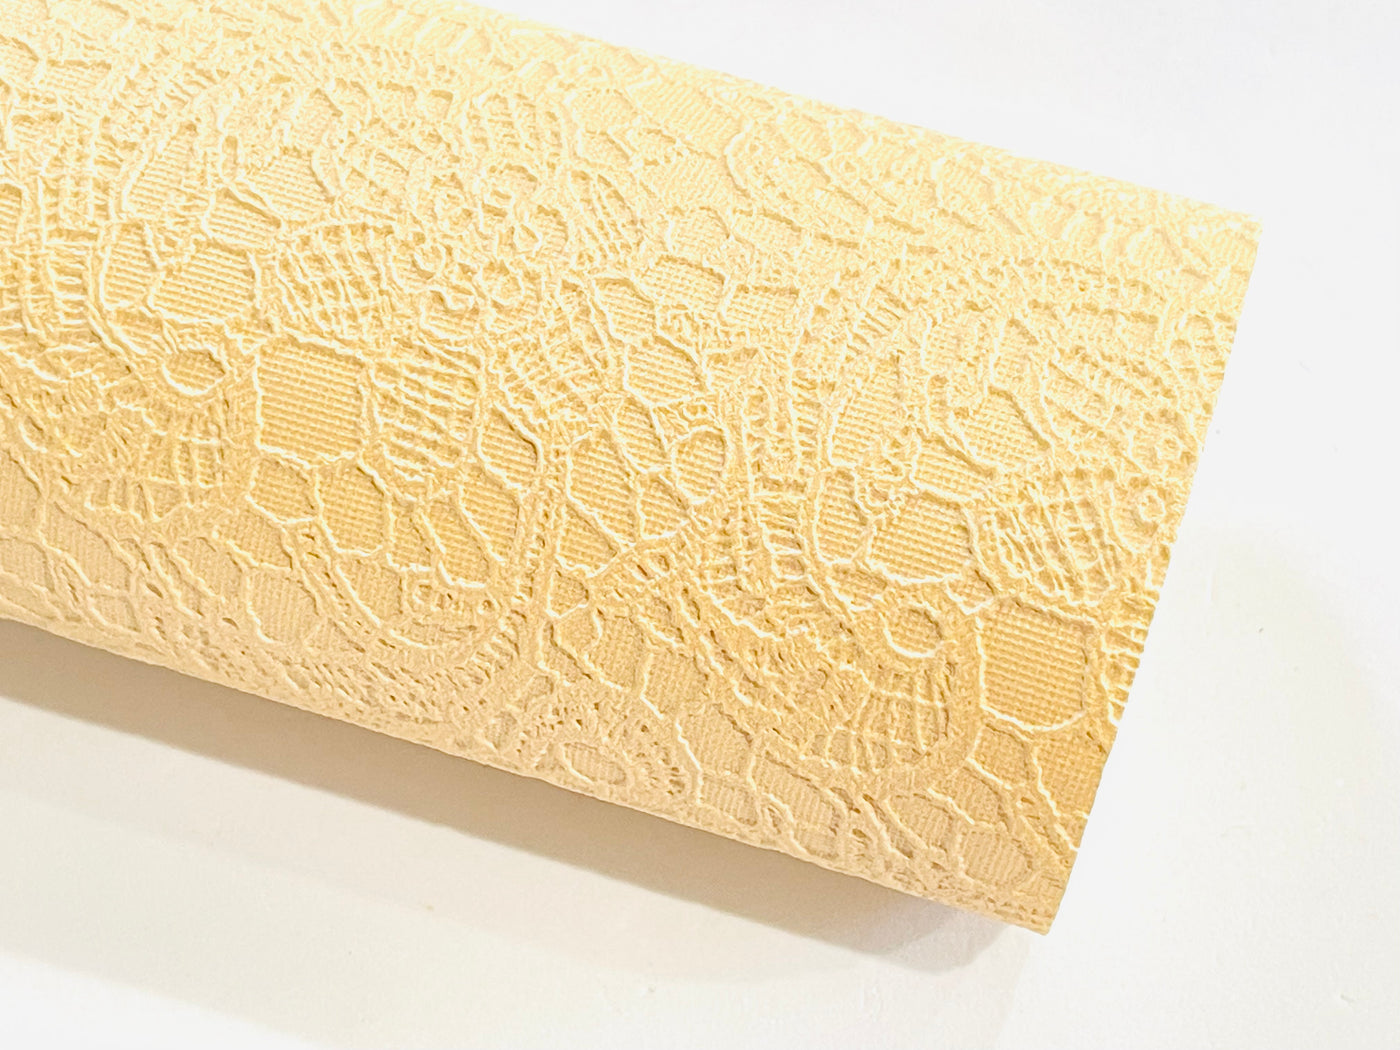 Apricot Gelato Lace Embossed Faux Leatherette Sheet